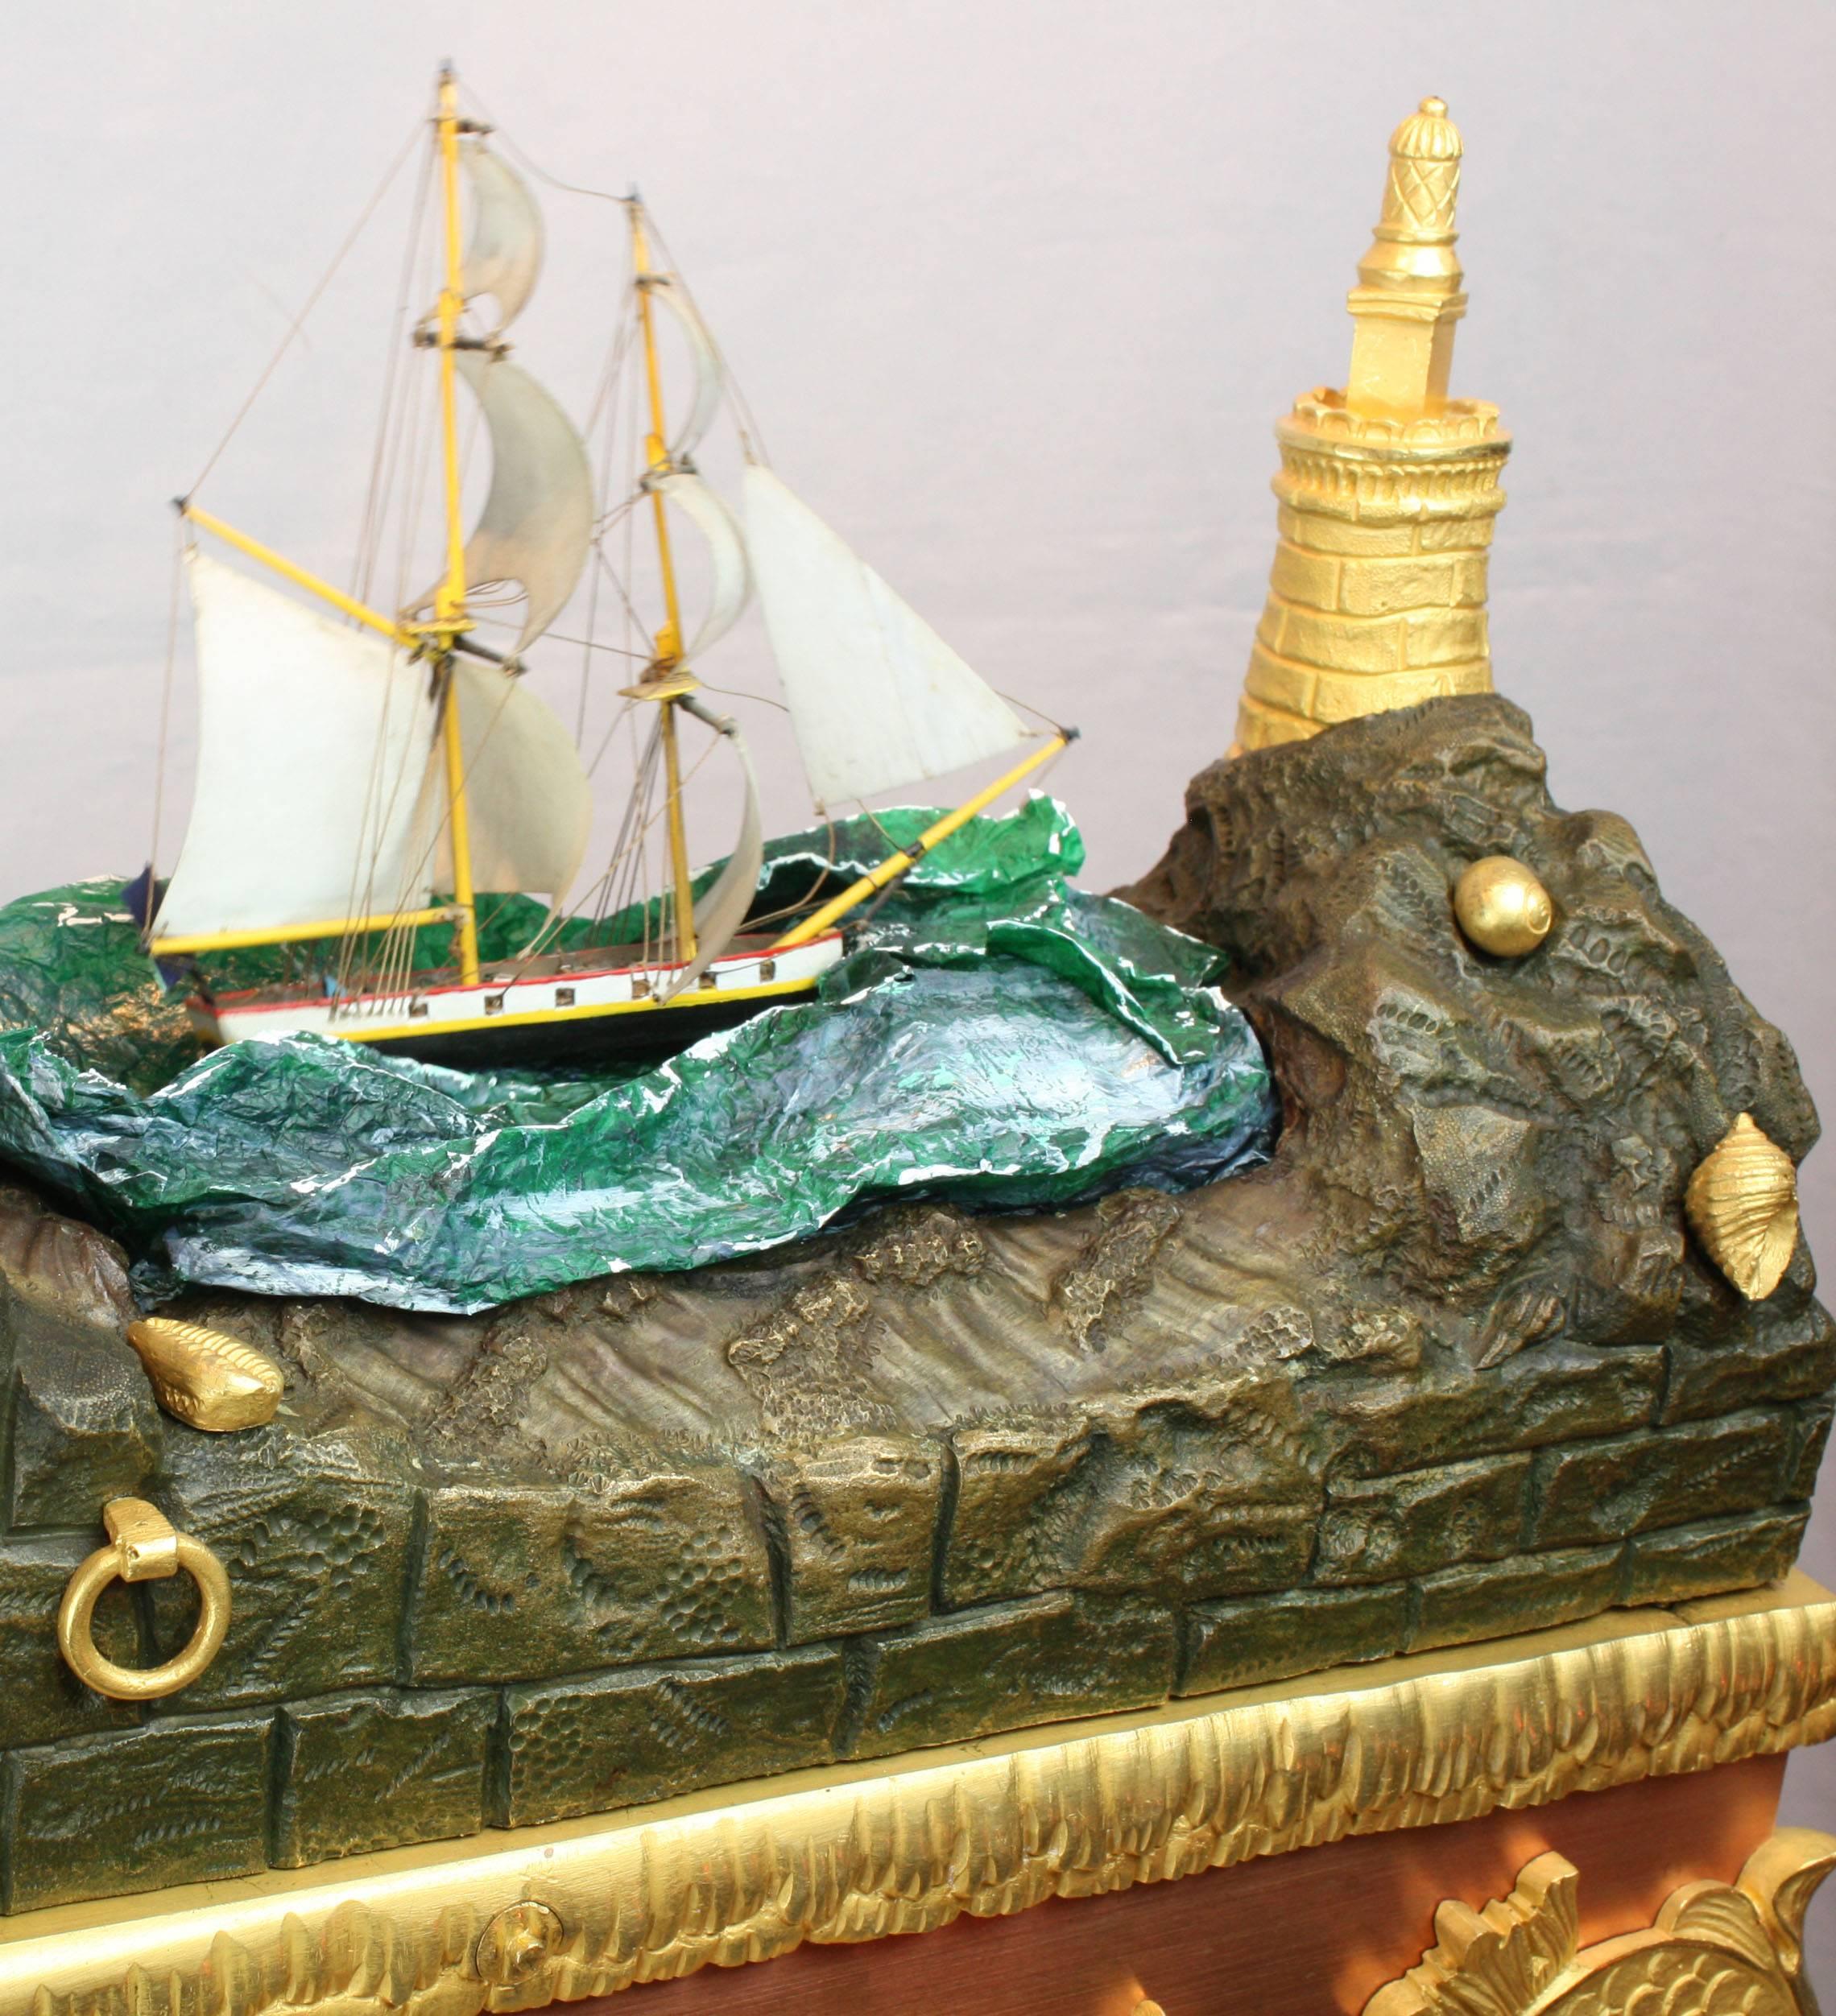 A very fine and large antique bronze, ormolu and polished copper on bronze rocking ship automaton clock,
 
French,
 
circa 1840.
 
From the first golden age of automata.
 
Our Mariner's spectacular.

A video is available upon request.
